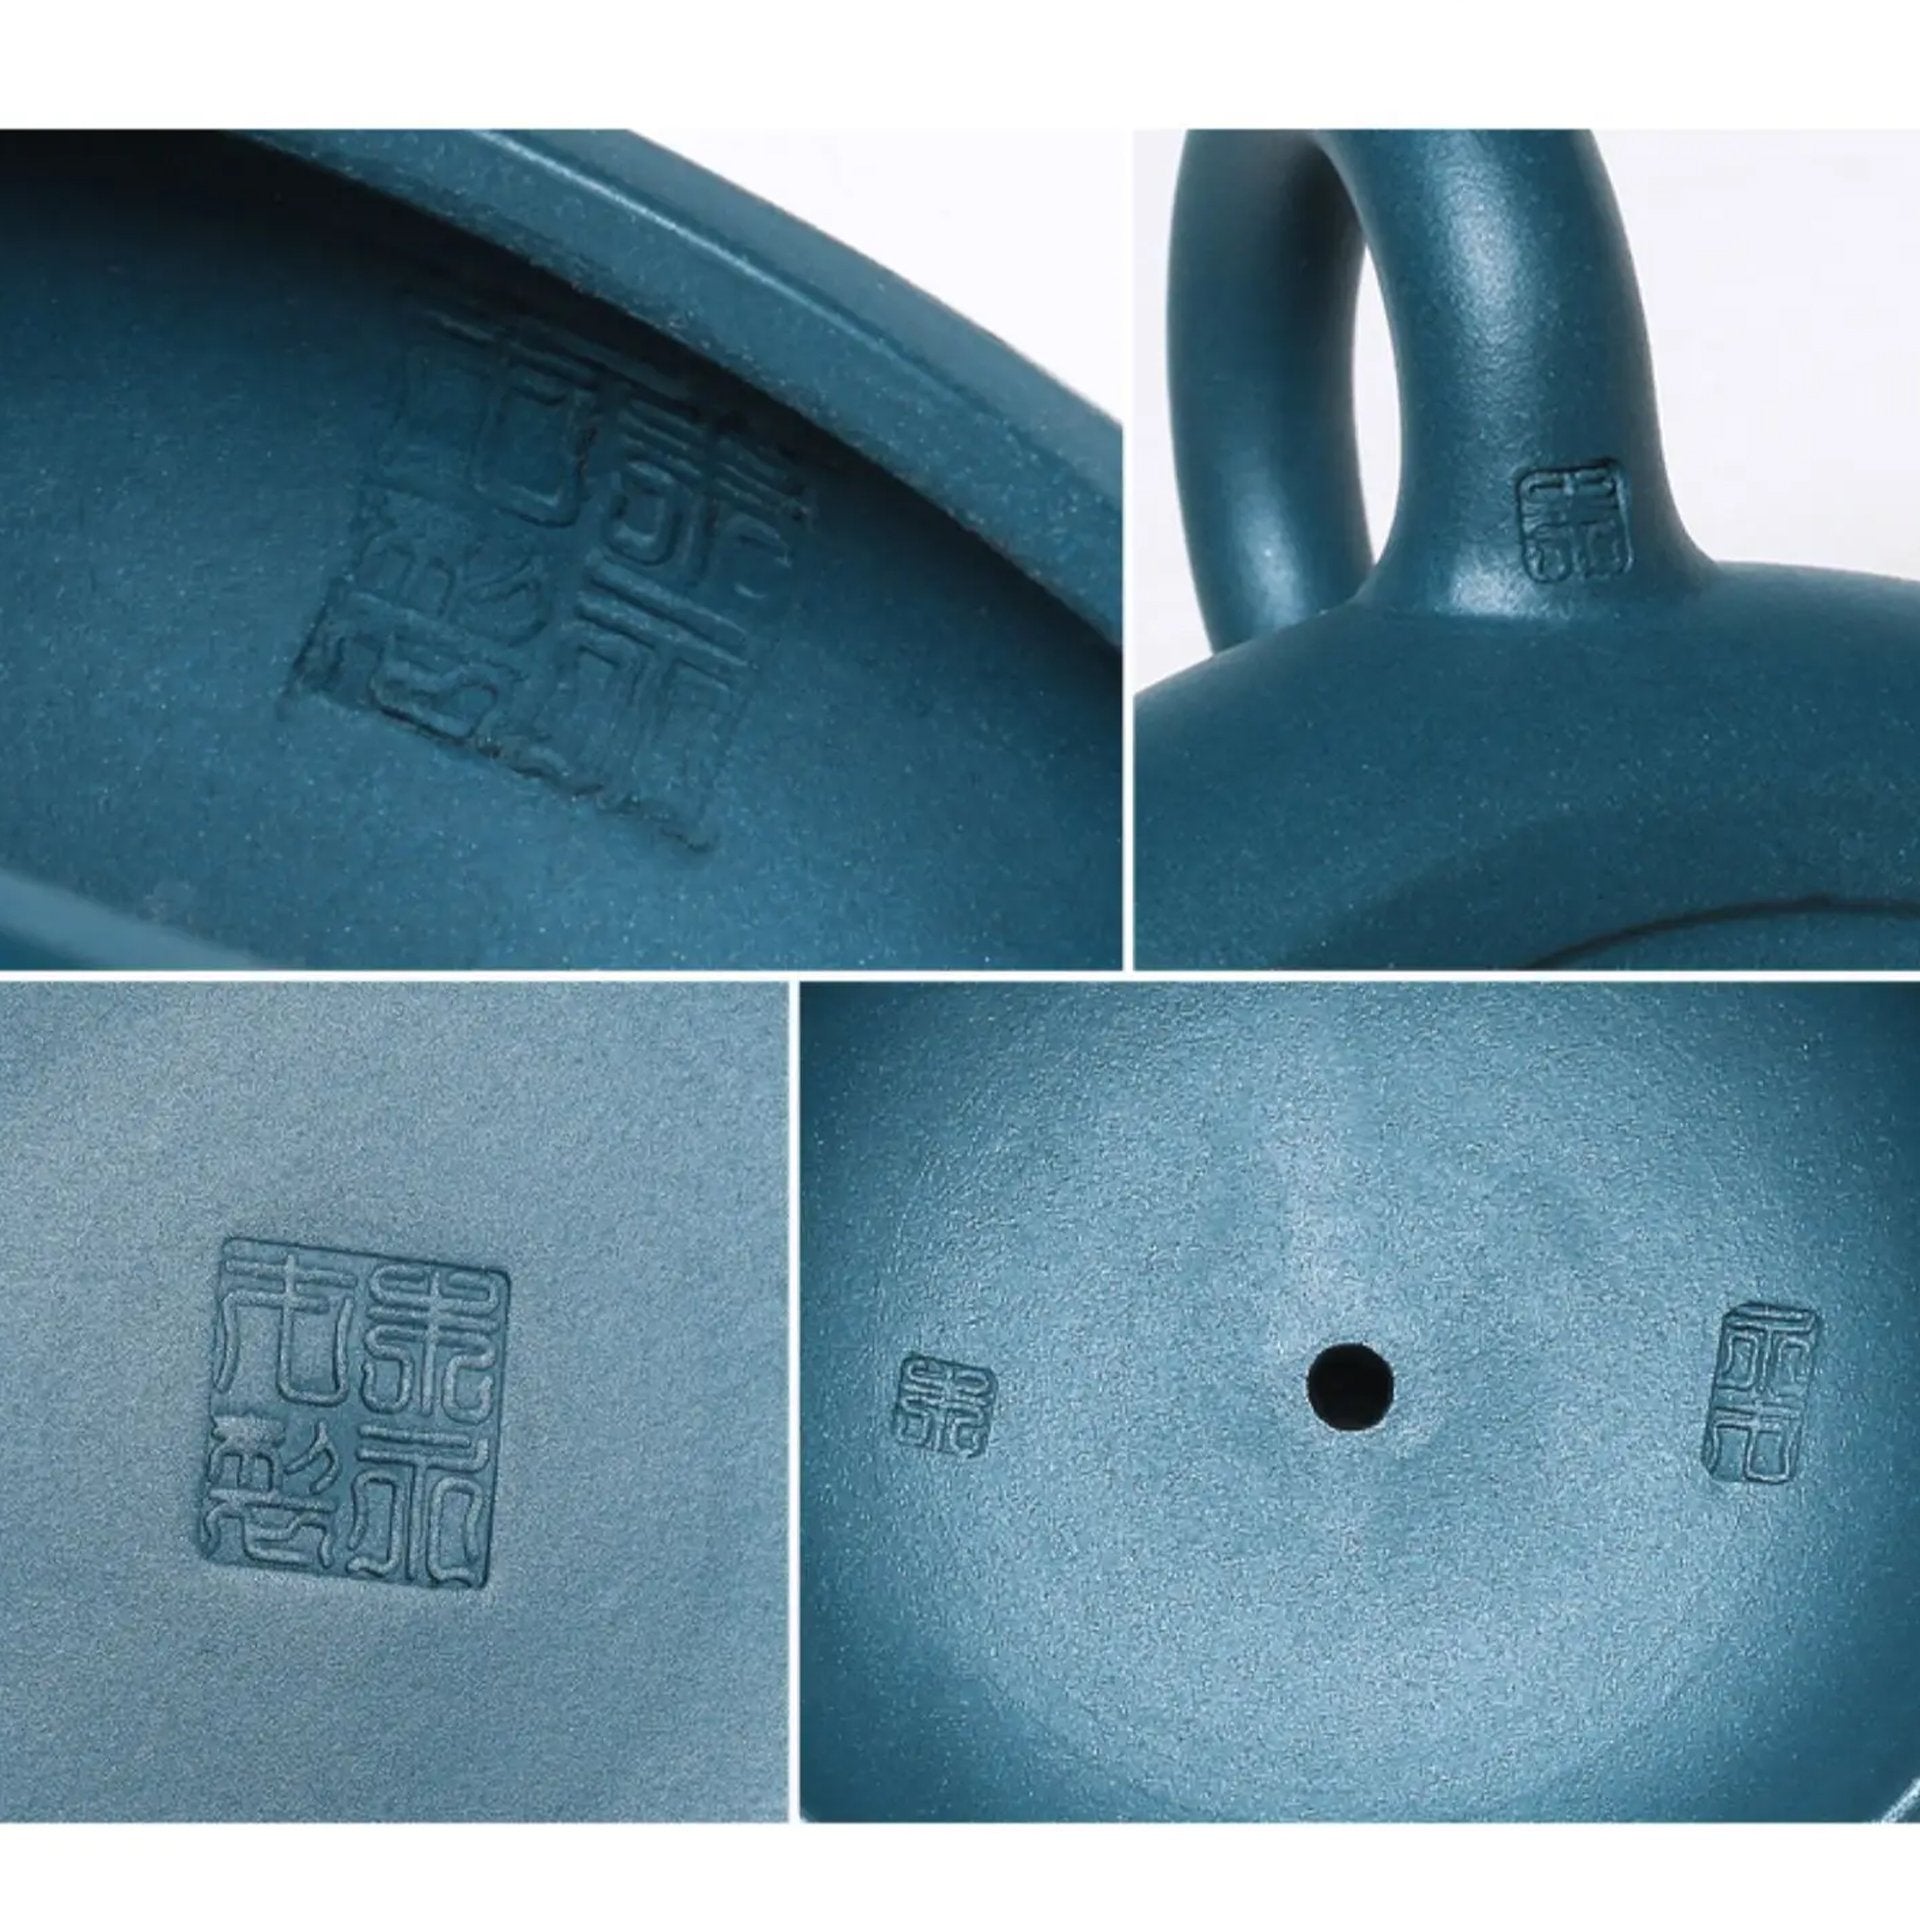 Close-up views of a blue teapot's details showing a stamp, spout, and body.